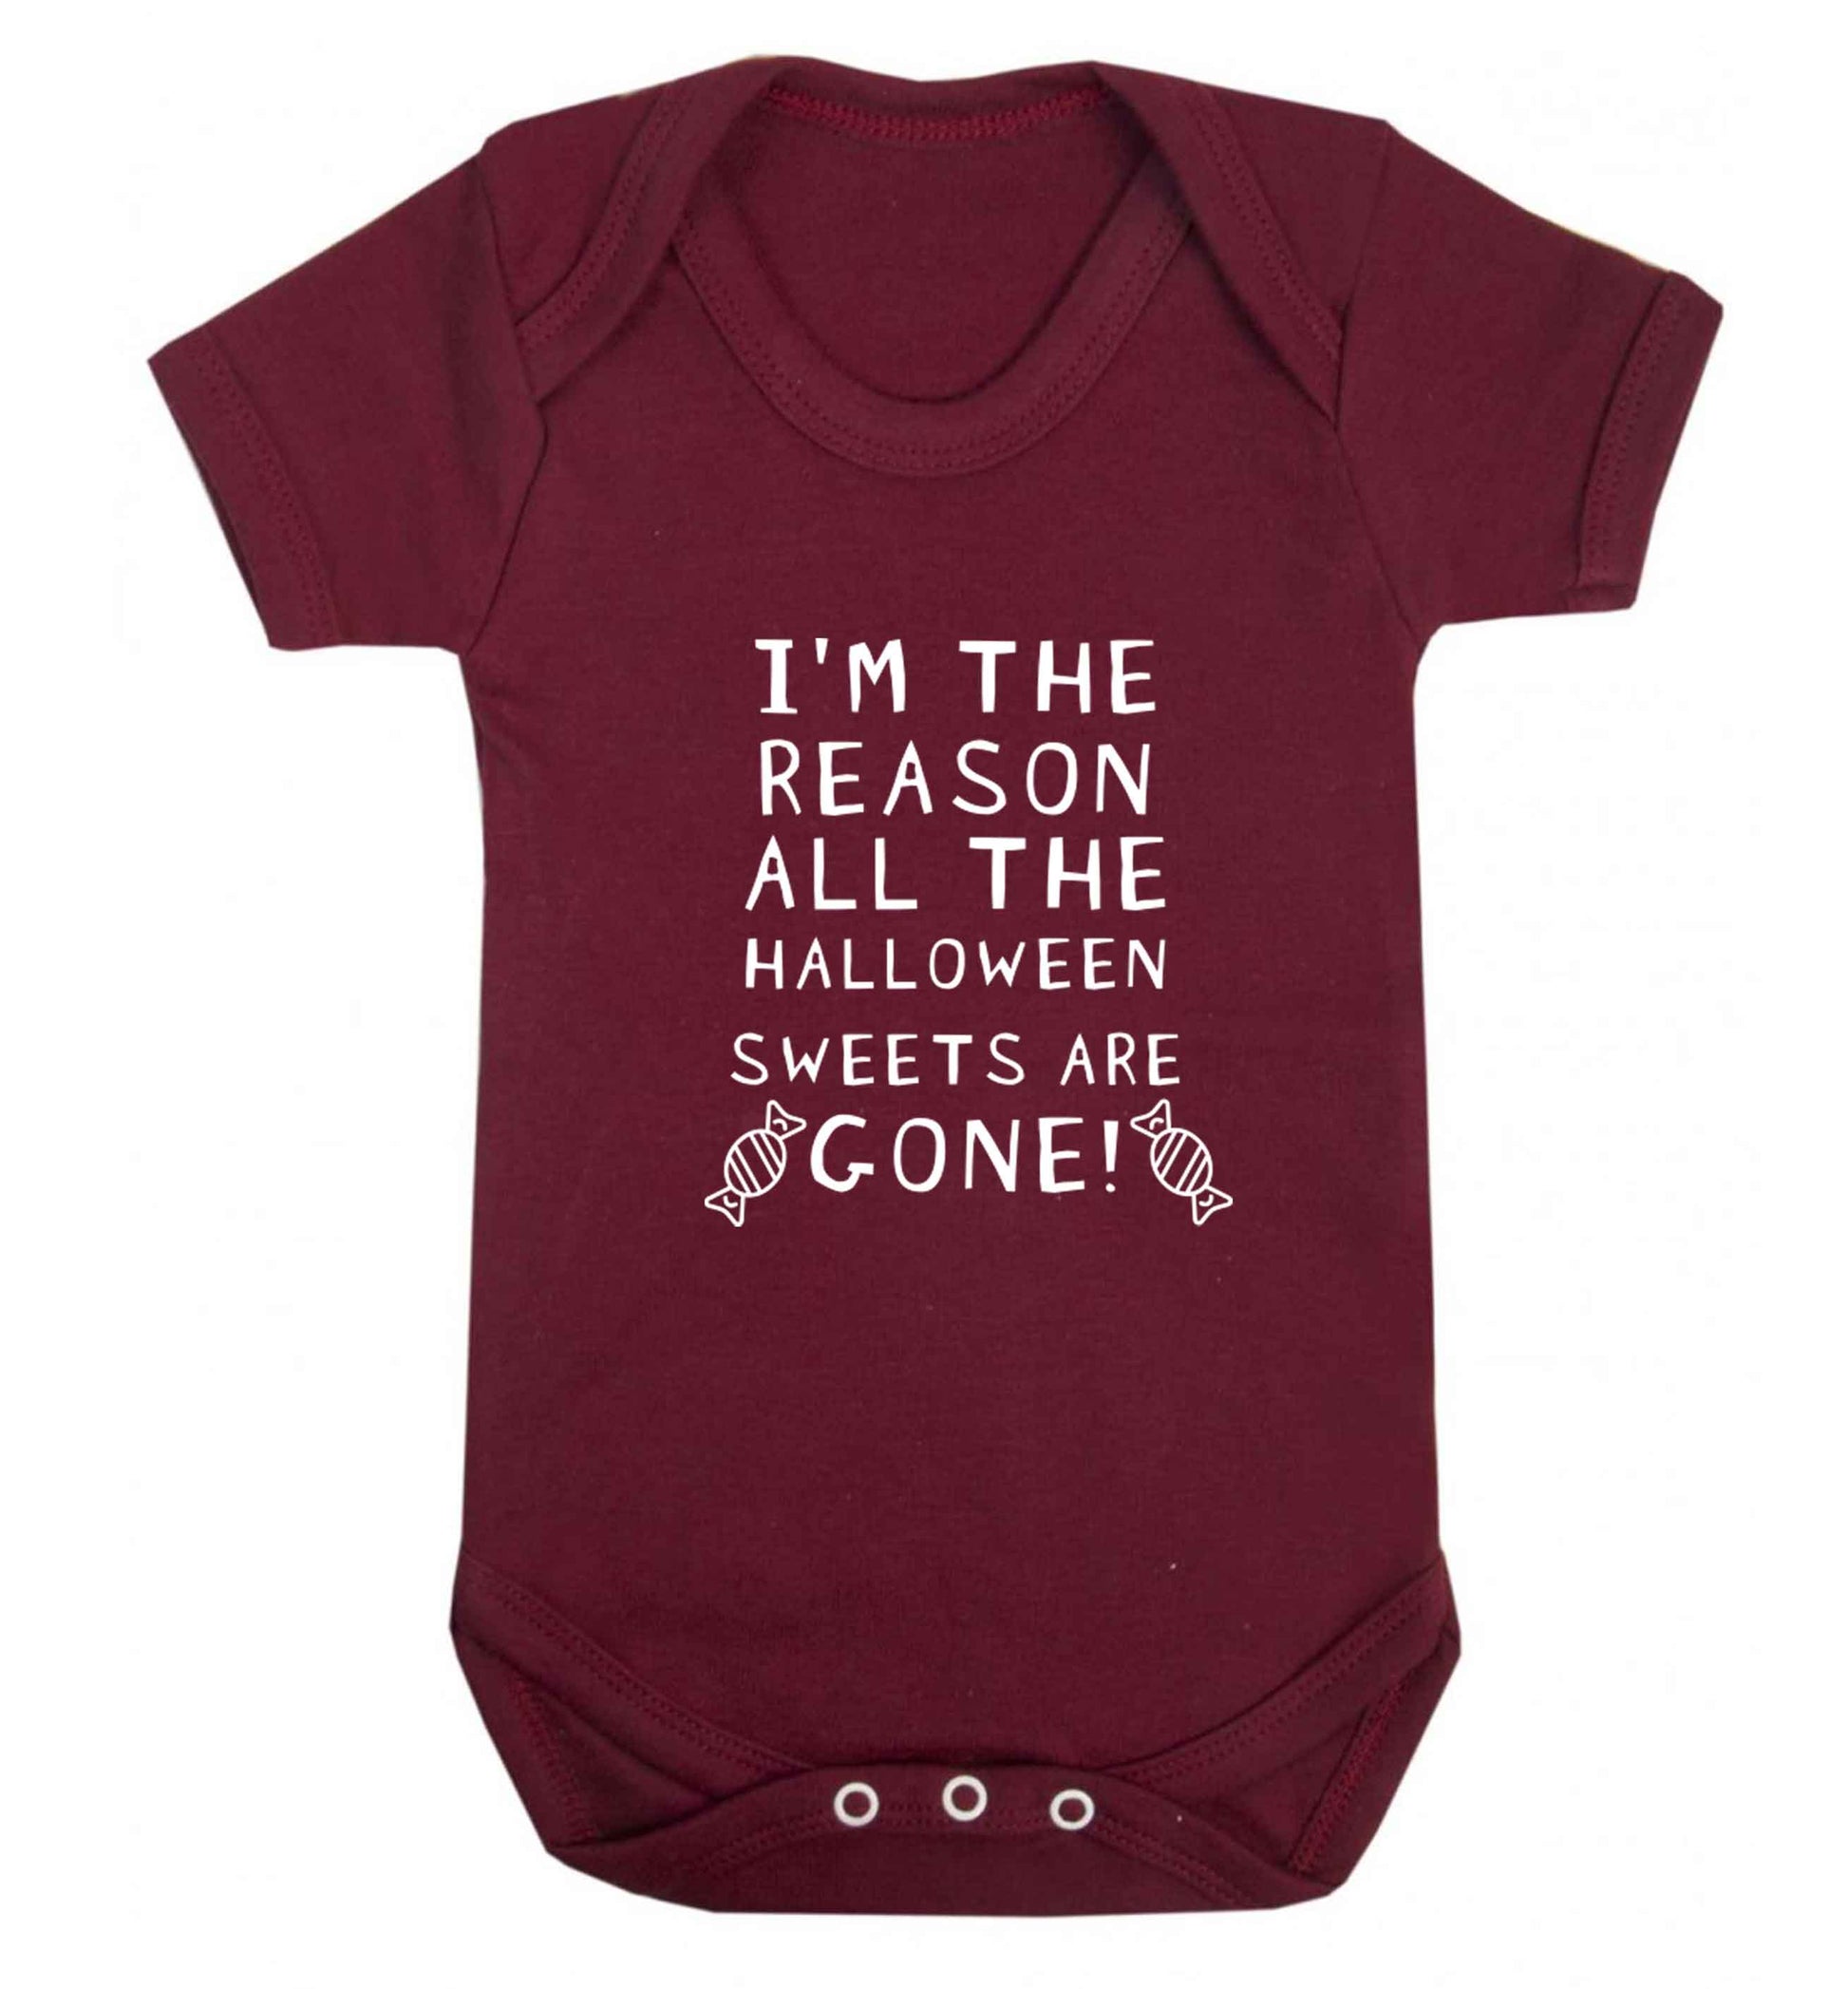 I'm the reason all of the halloween sweets are gone baby vest maroon 18-24 months